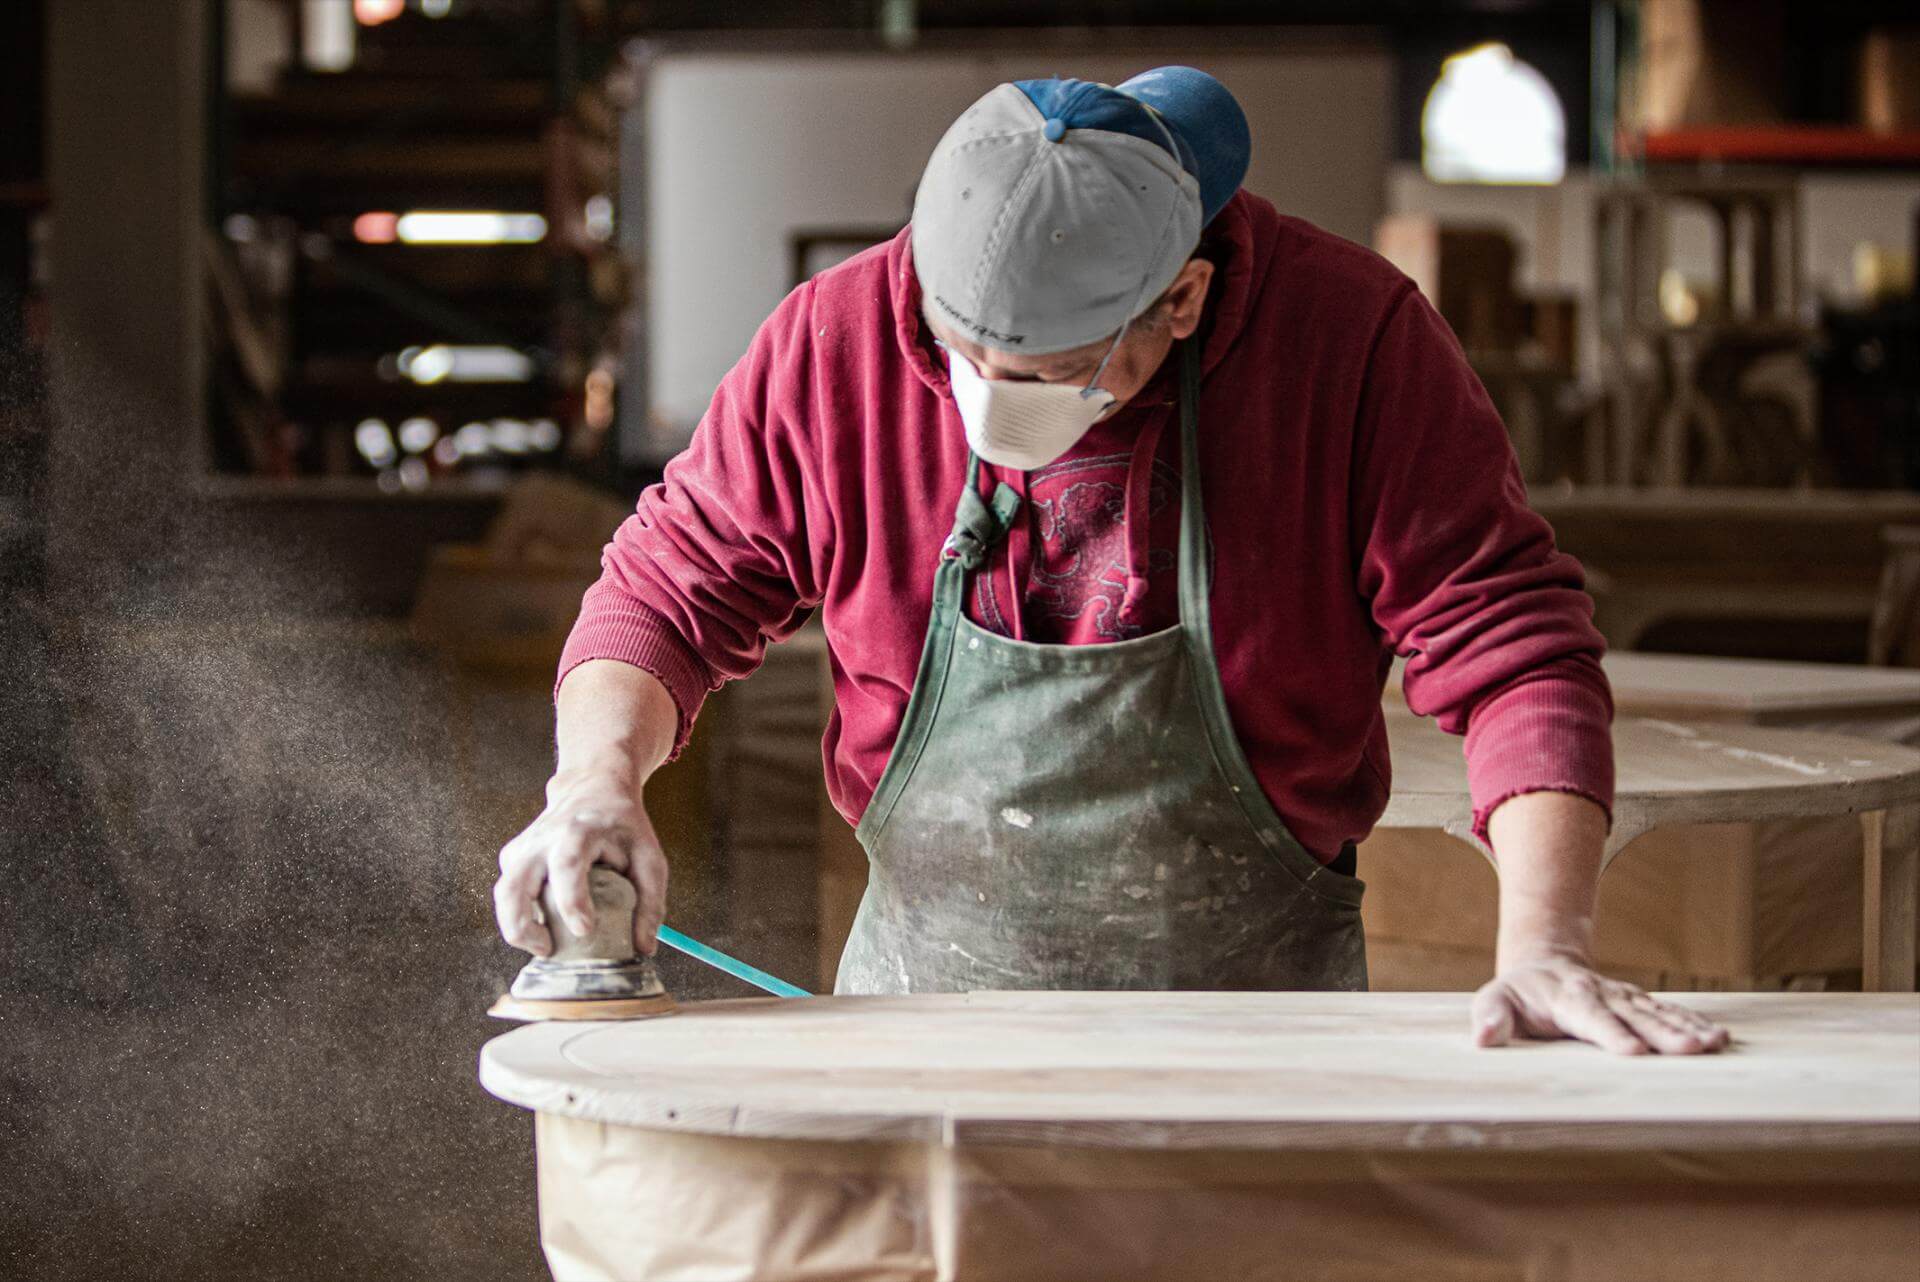 Meet the Makers of our Handmade Furniture